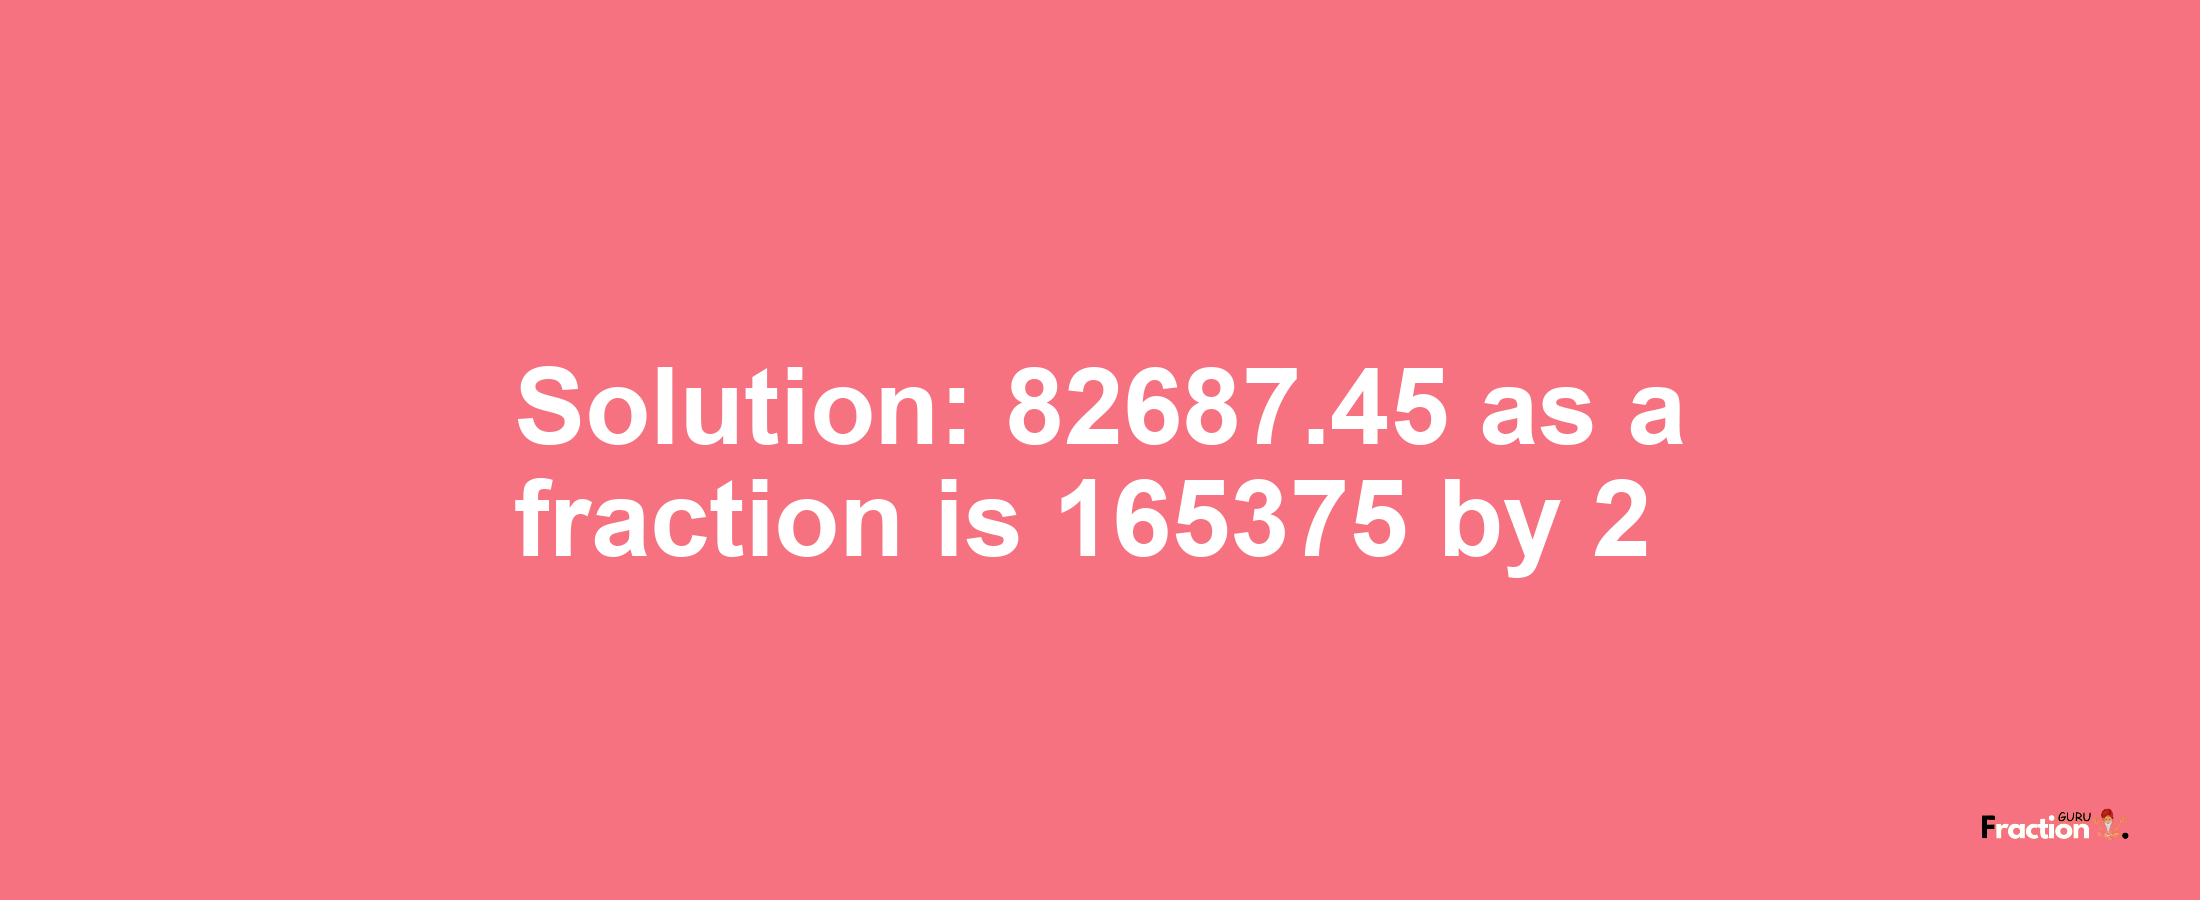 Solution:82687.45 as a fraction is 165375/2